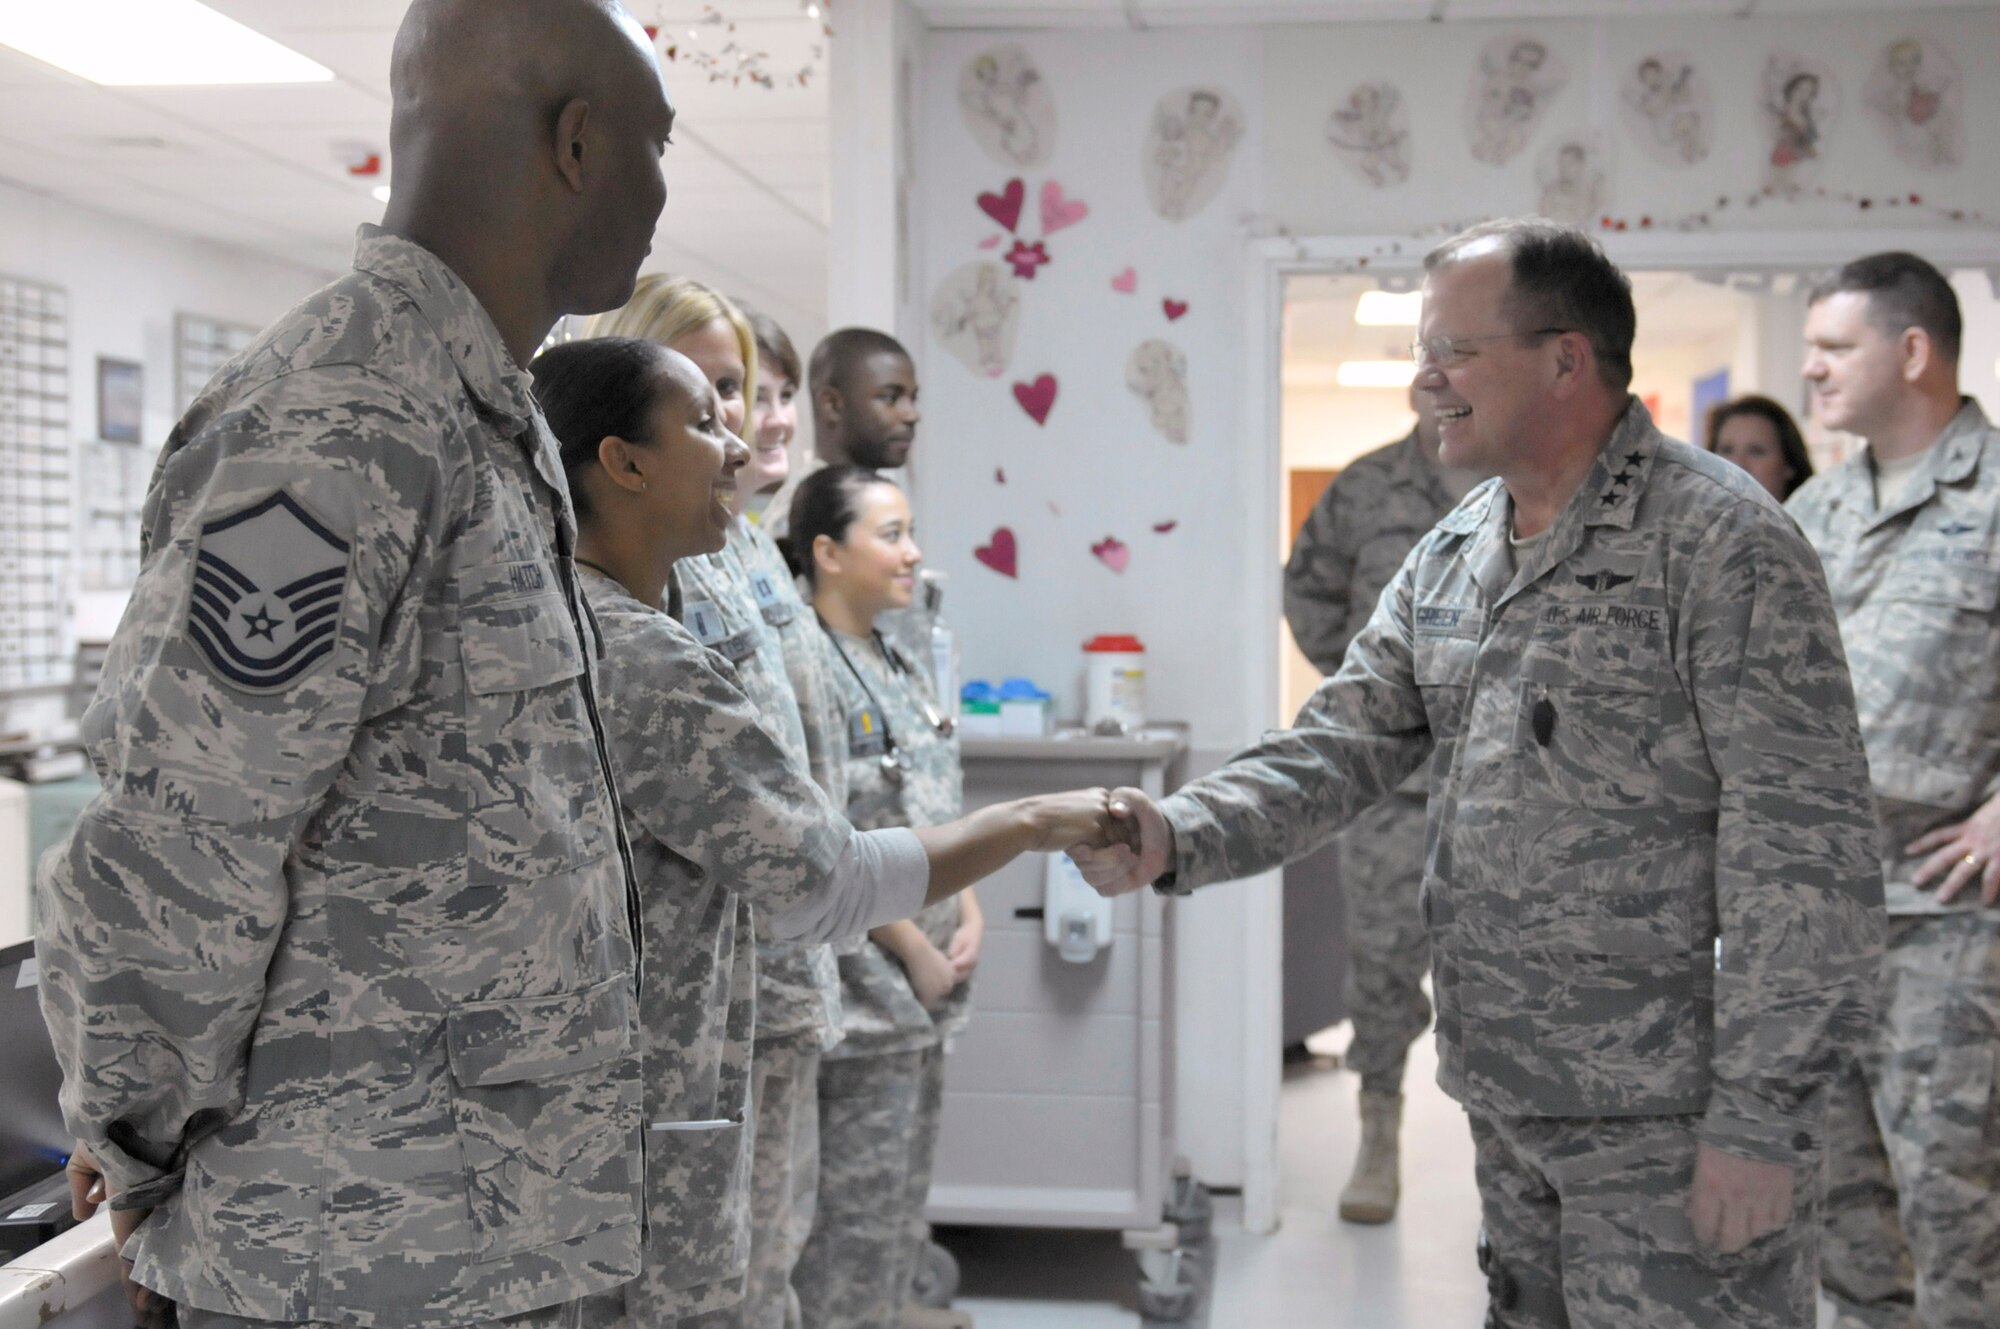 Air Force Surgeon General Lt. Gen. (Dr.) Charles B. Green meets members of the 455th Expeditionary Medical Group Feb. 13, 2011, at the Craig Joint Theater Hospital at Bagram Airfield, Afghanistan. (U.S. Air Force photo/Tech. Sgt. Michael Voss)